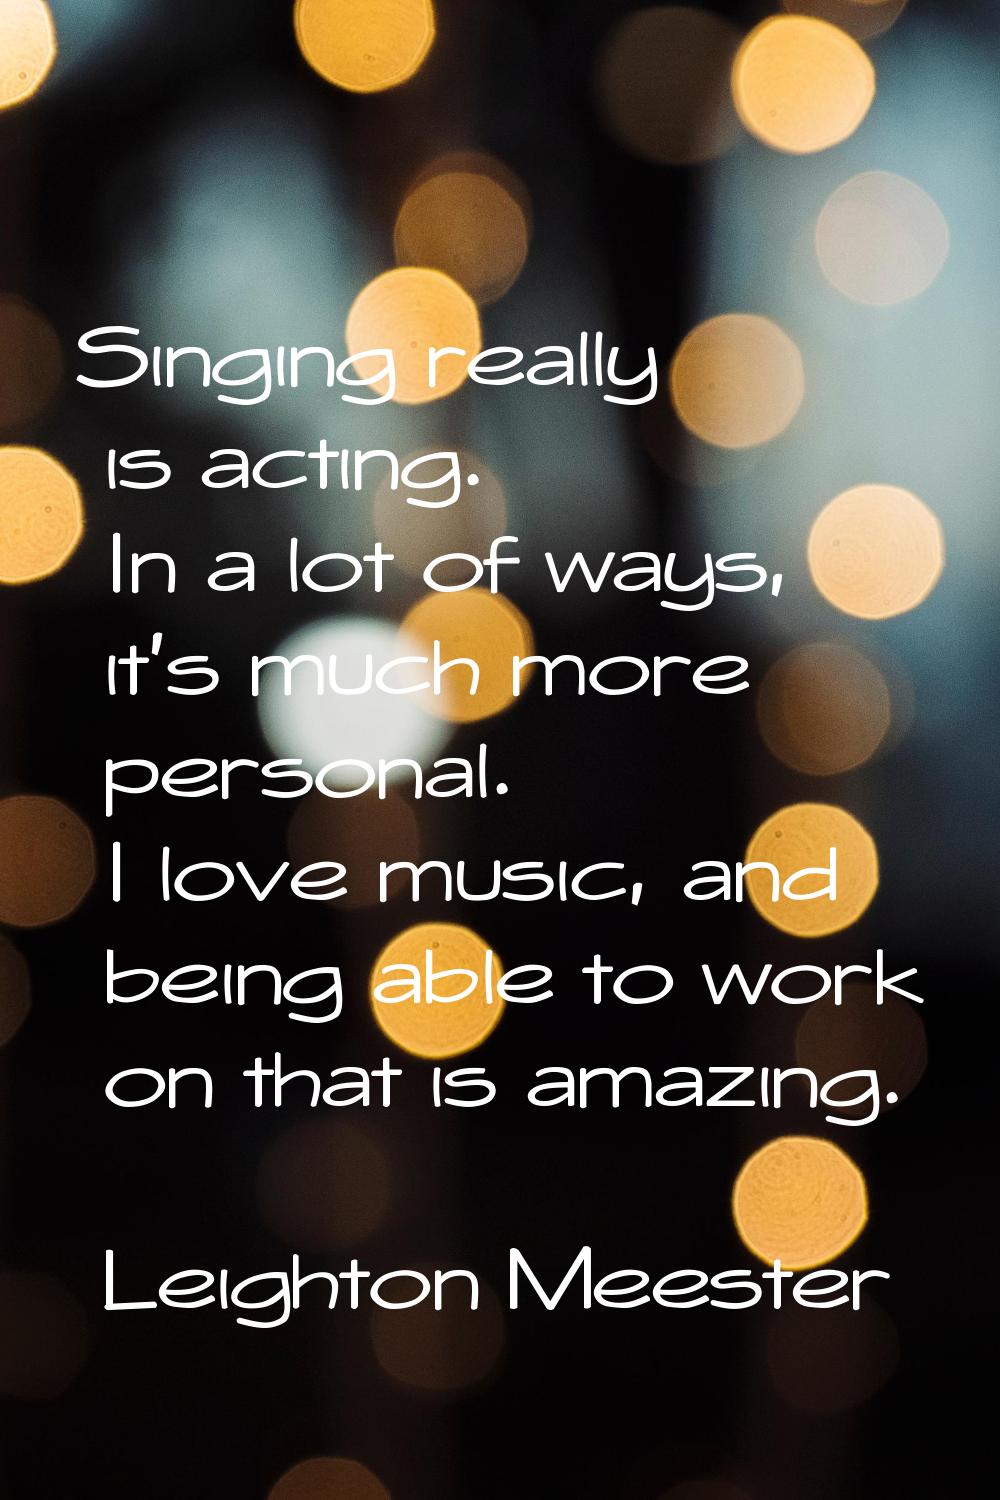 Singing really is acting. In a lot of ways, it's much more personal. I love music, and being able t